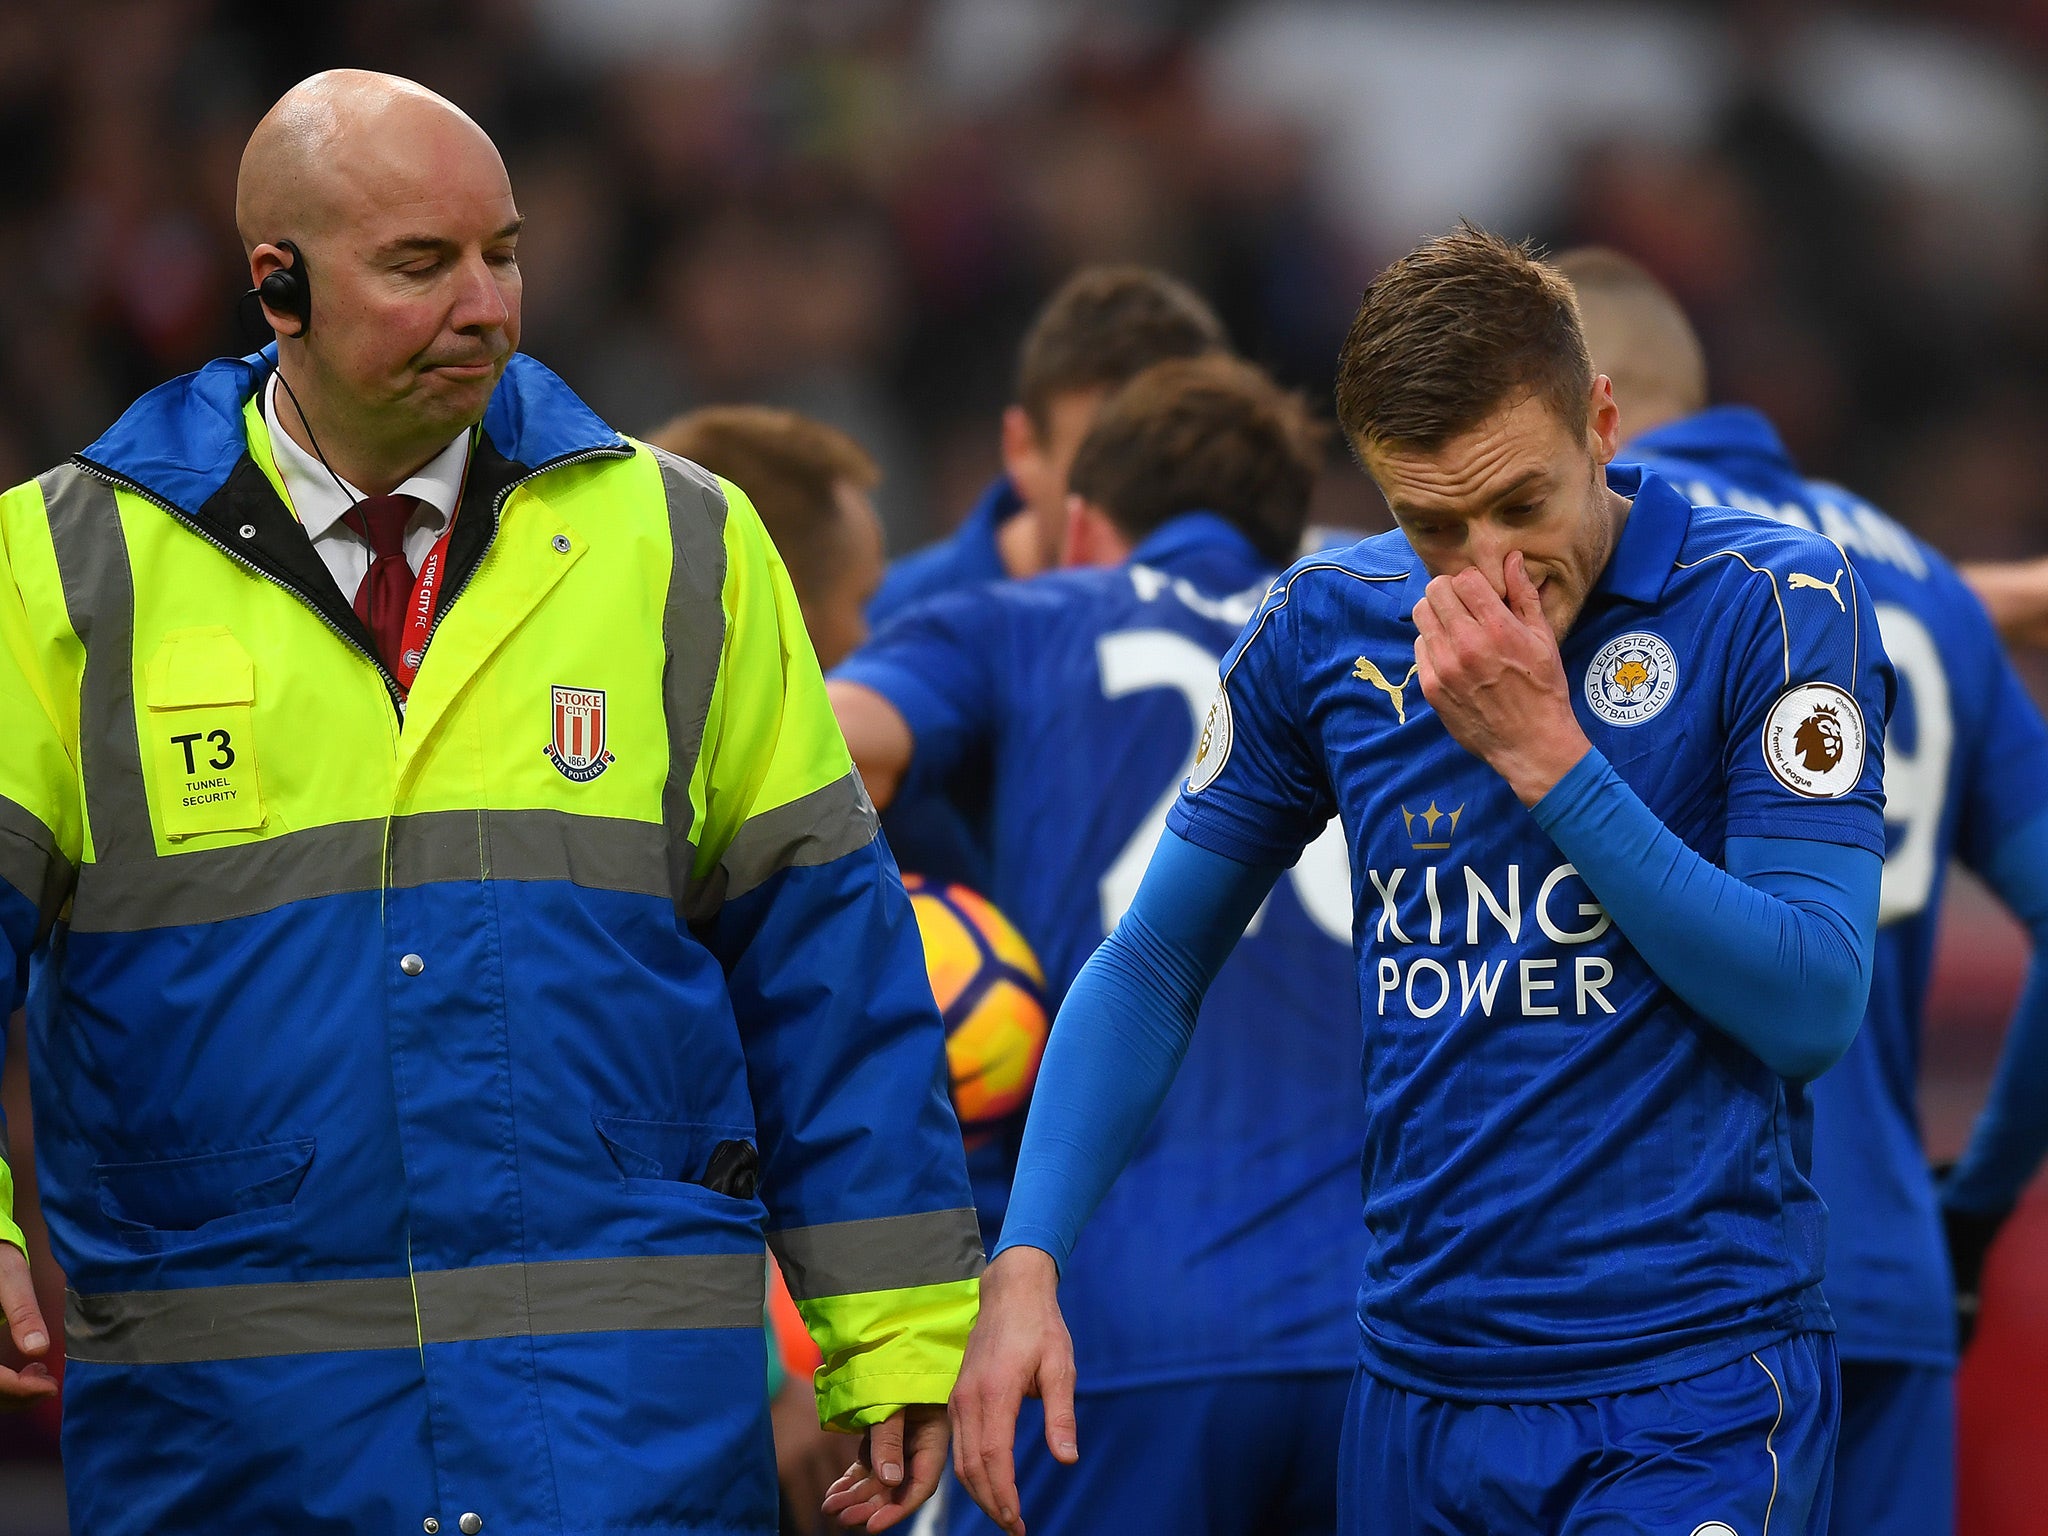 Leicester are in danger of relegation